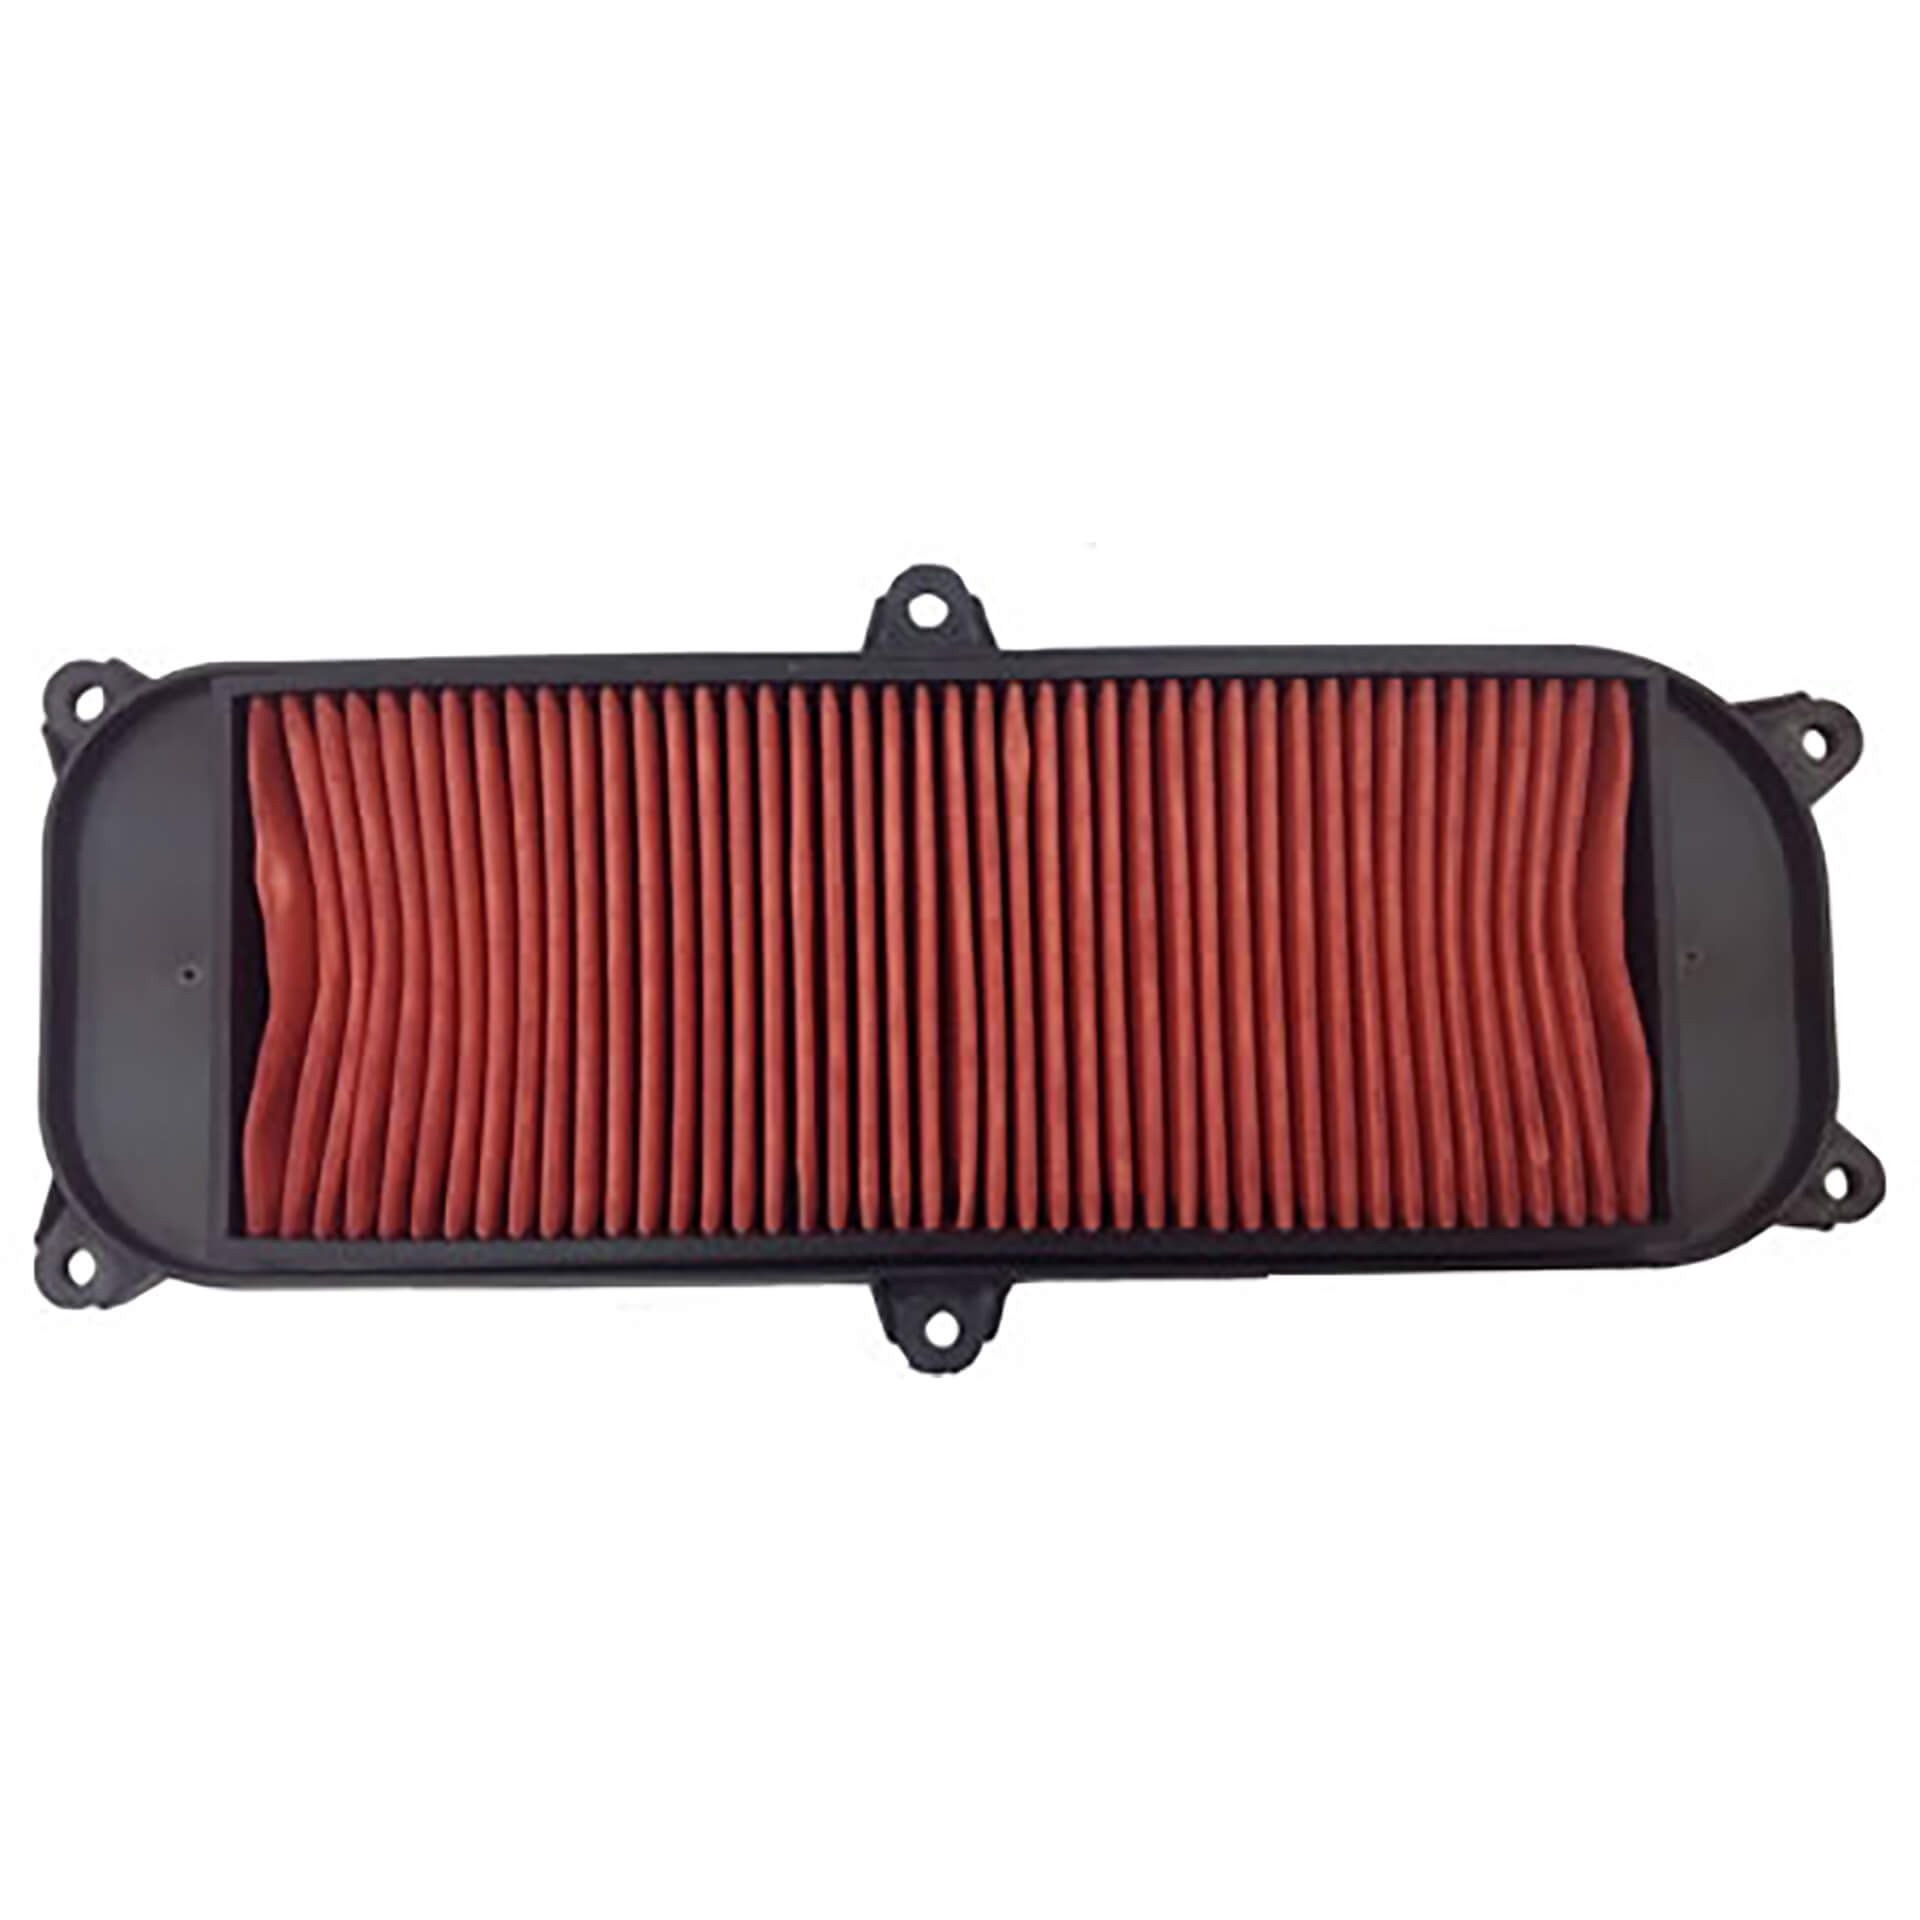 champion Air filter for KYMCO